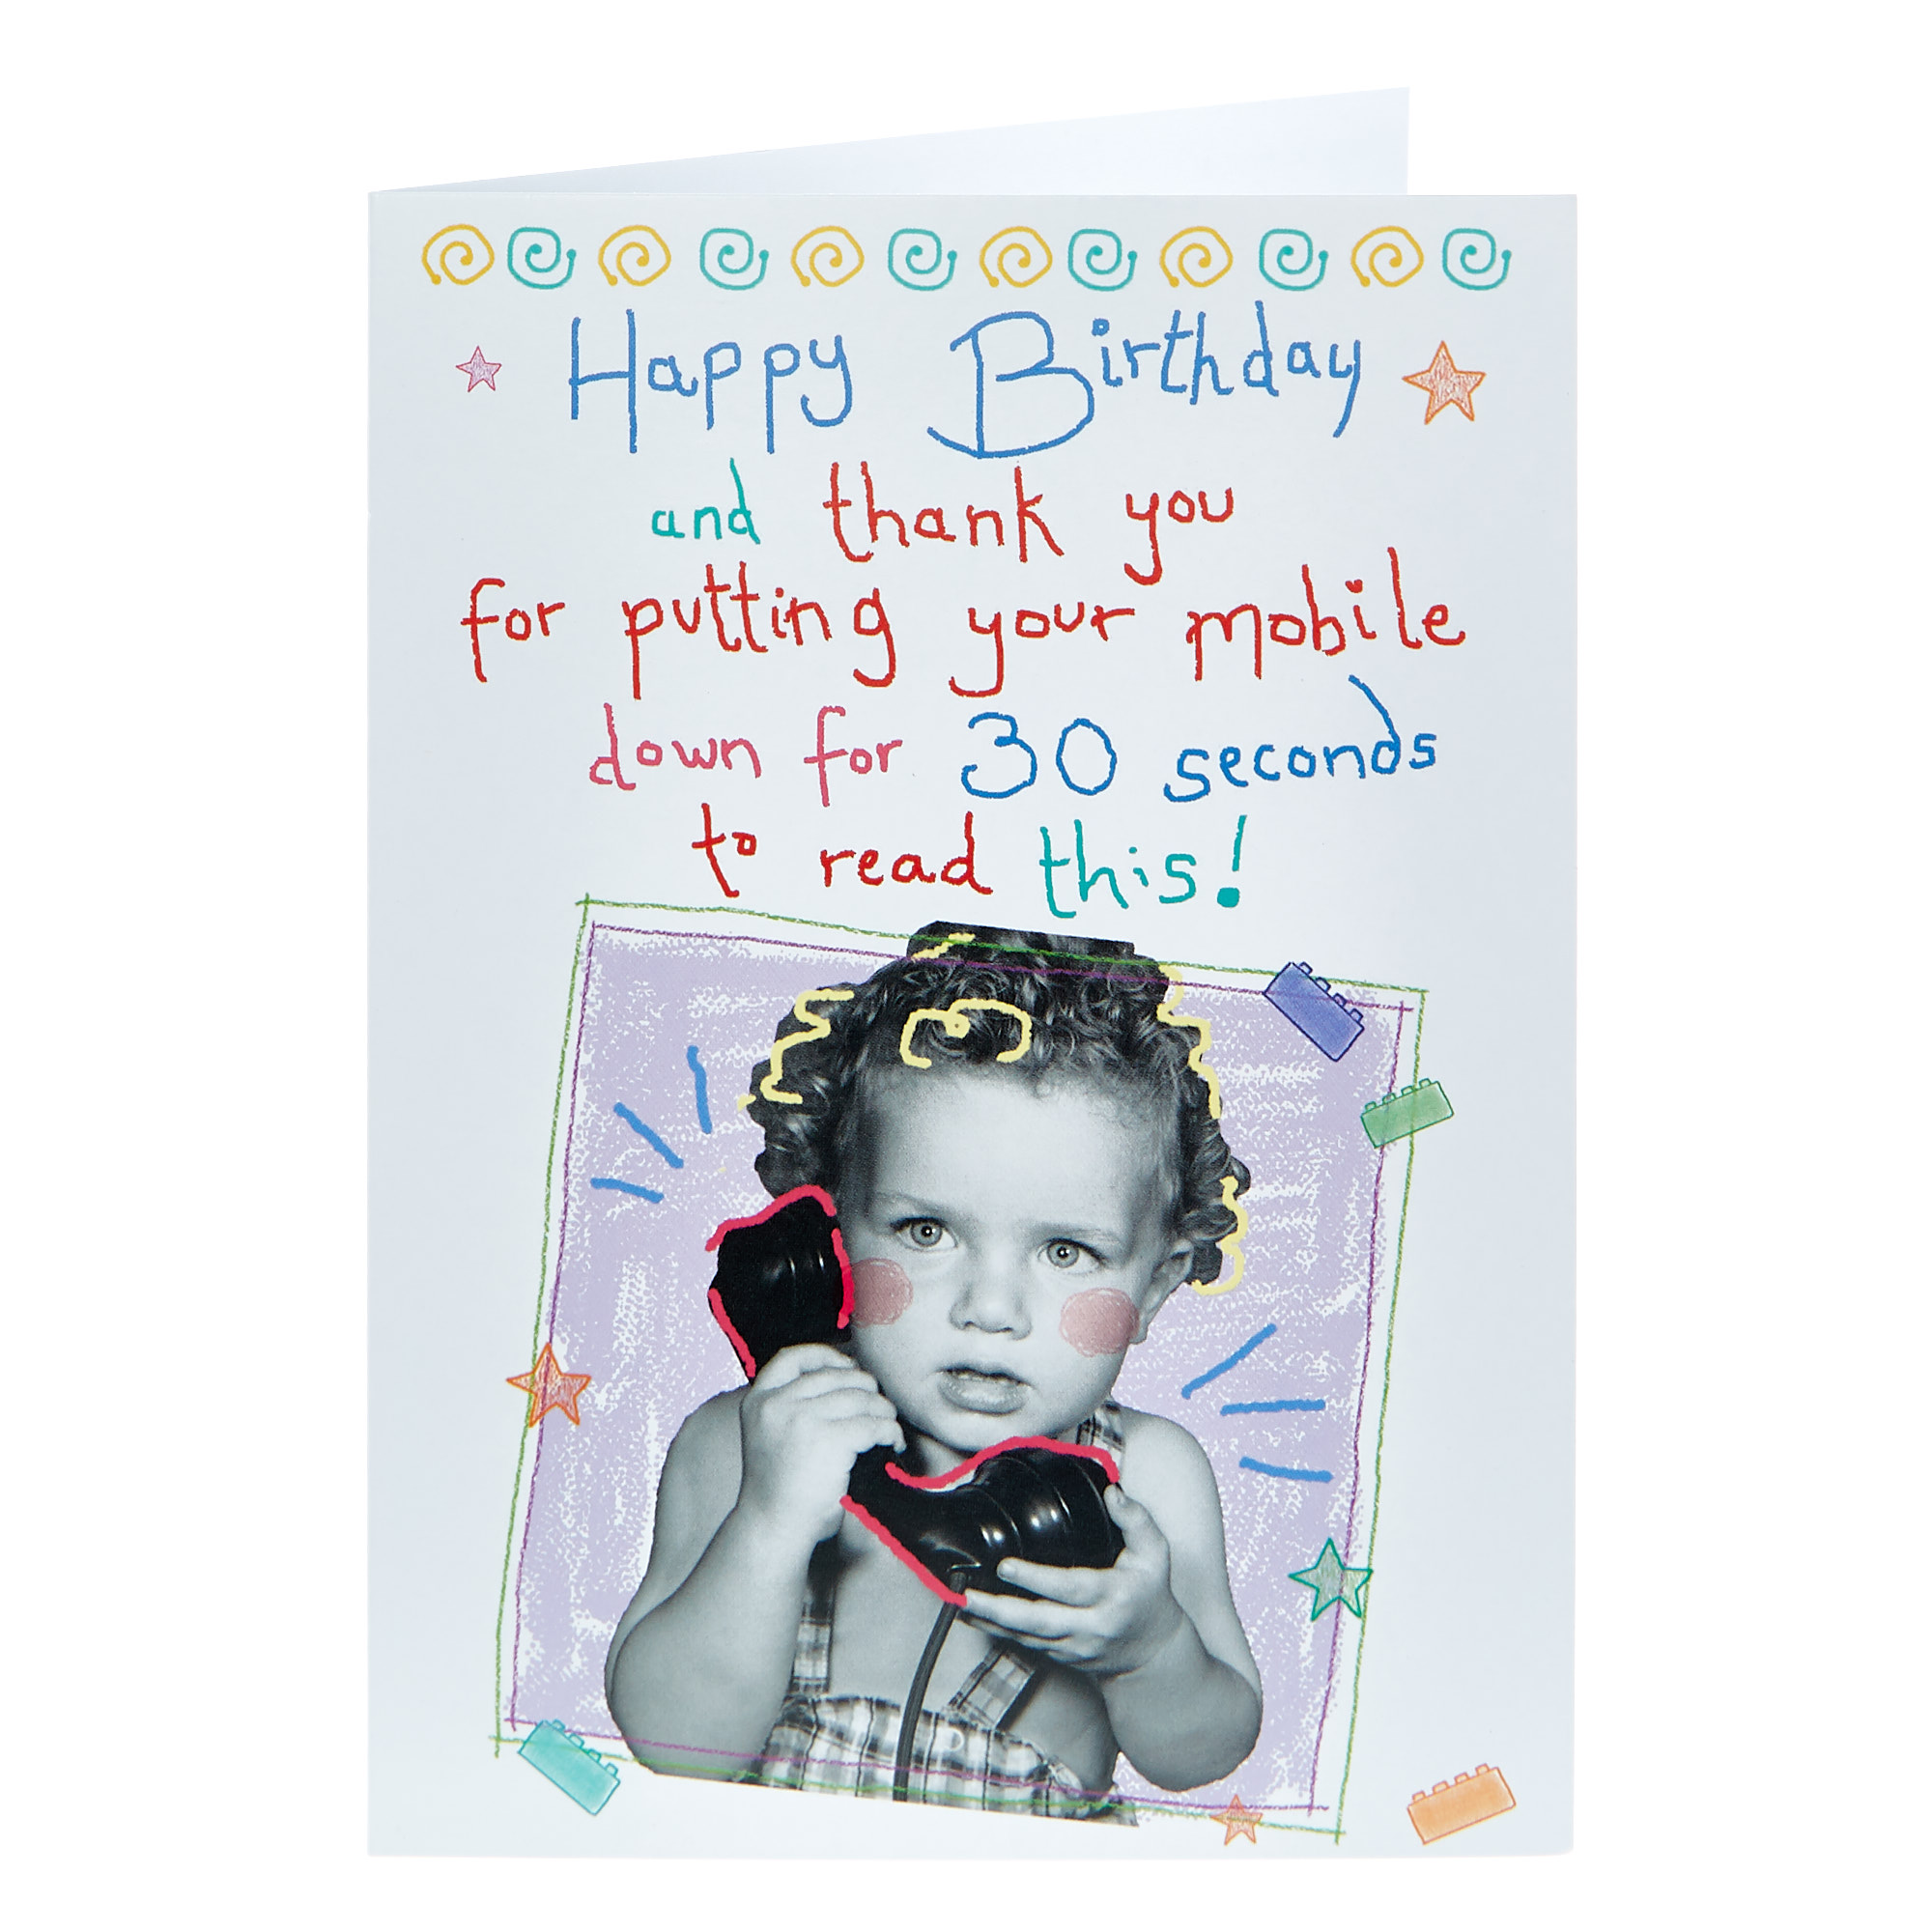 Birthday Card - Putting Your Mobile Down